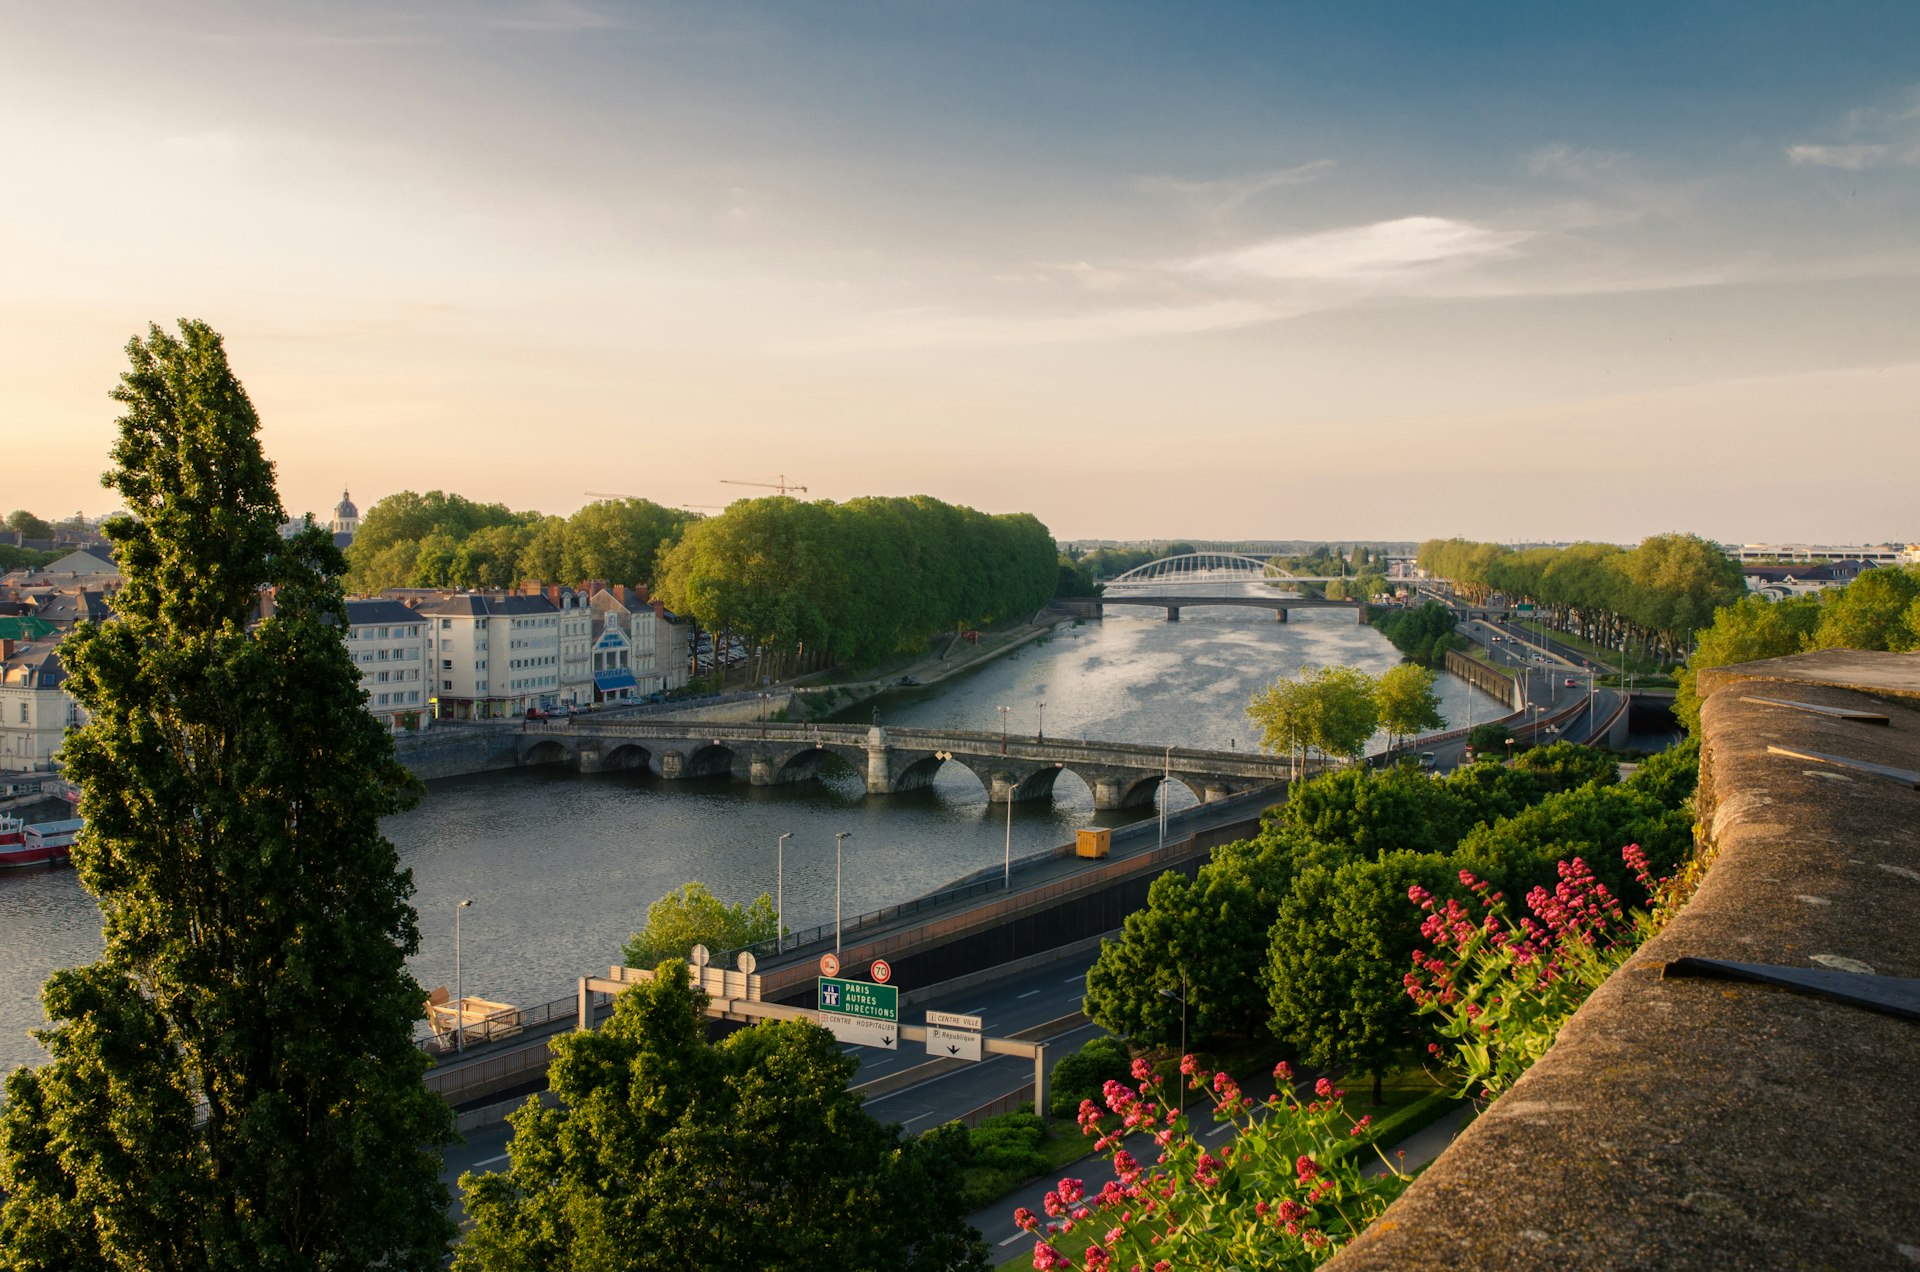 The Loire River as seen from a viewpoint at Angers in Loire Valley, France